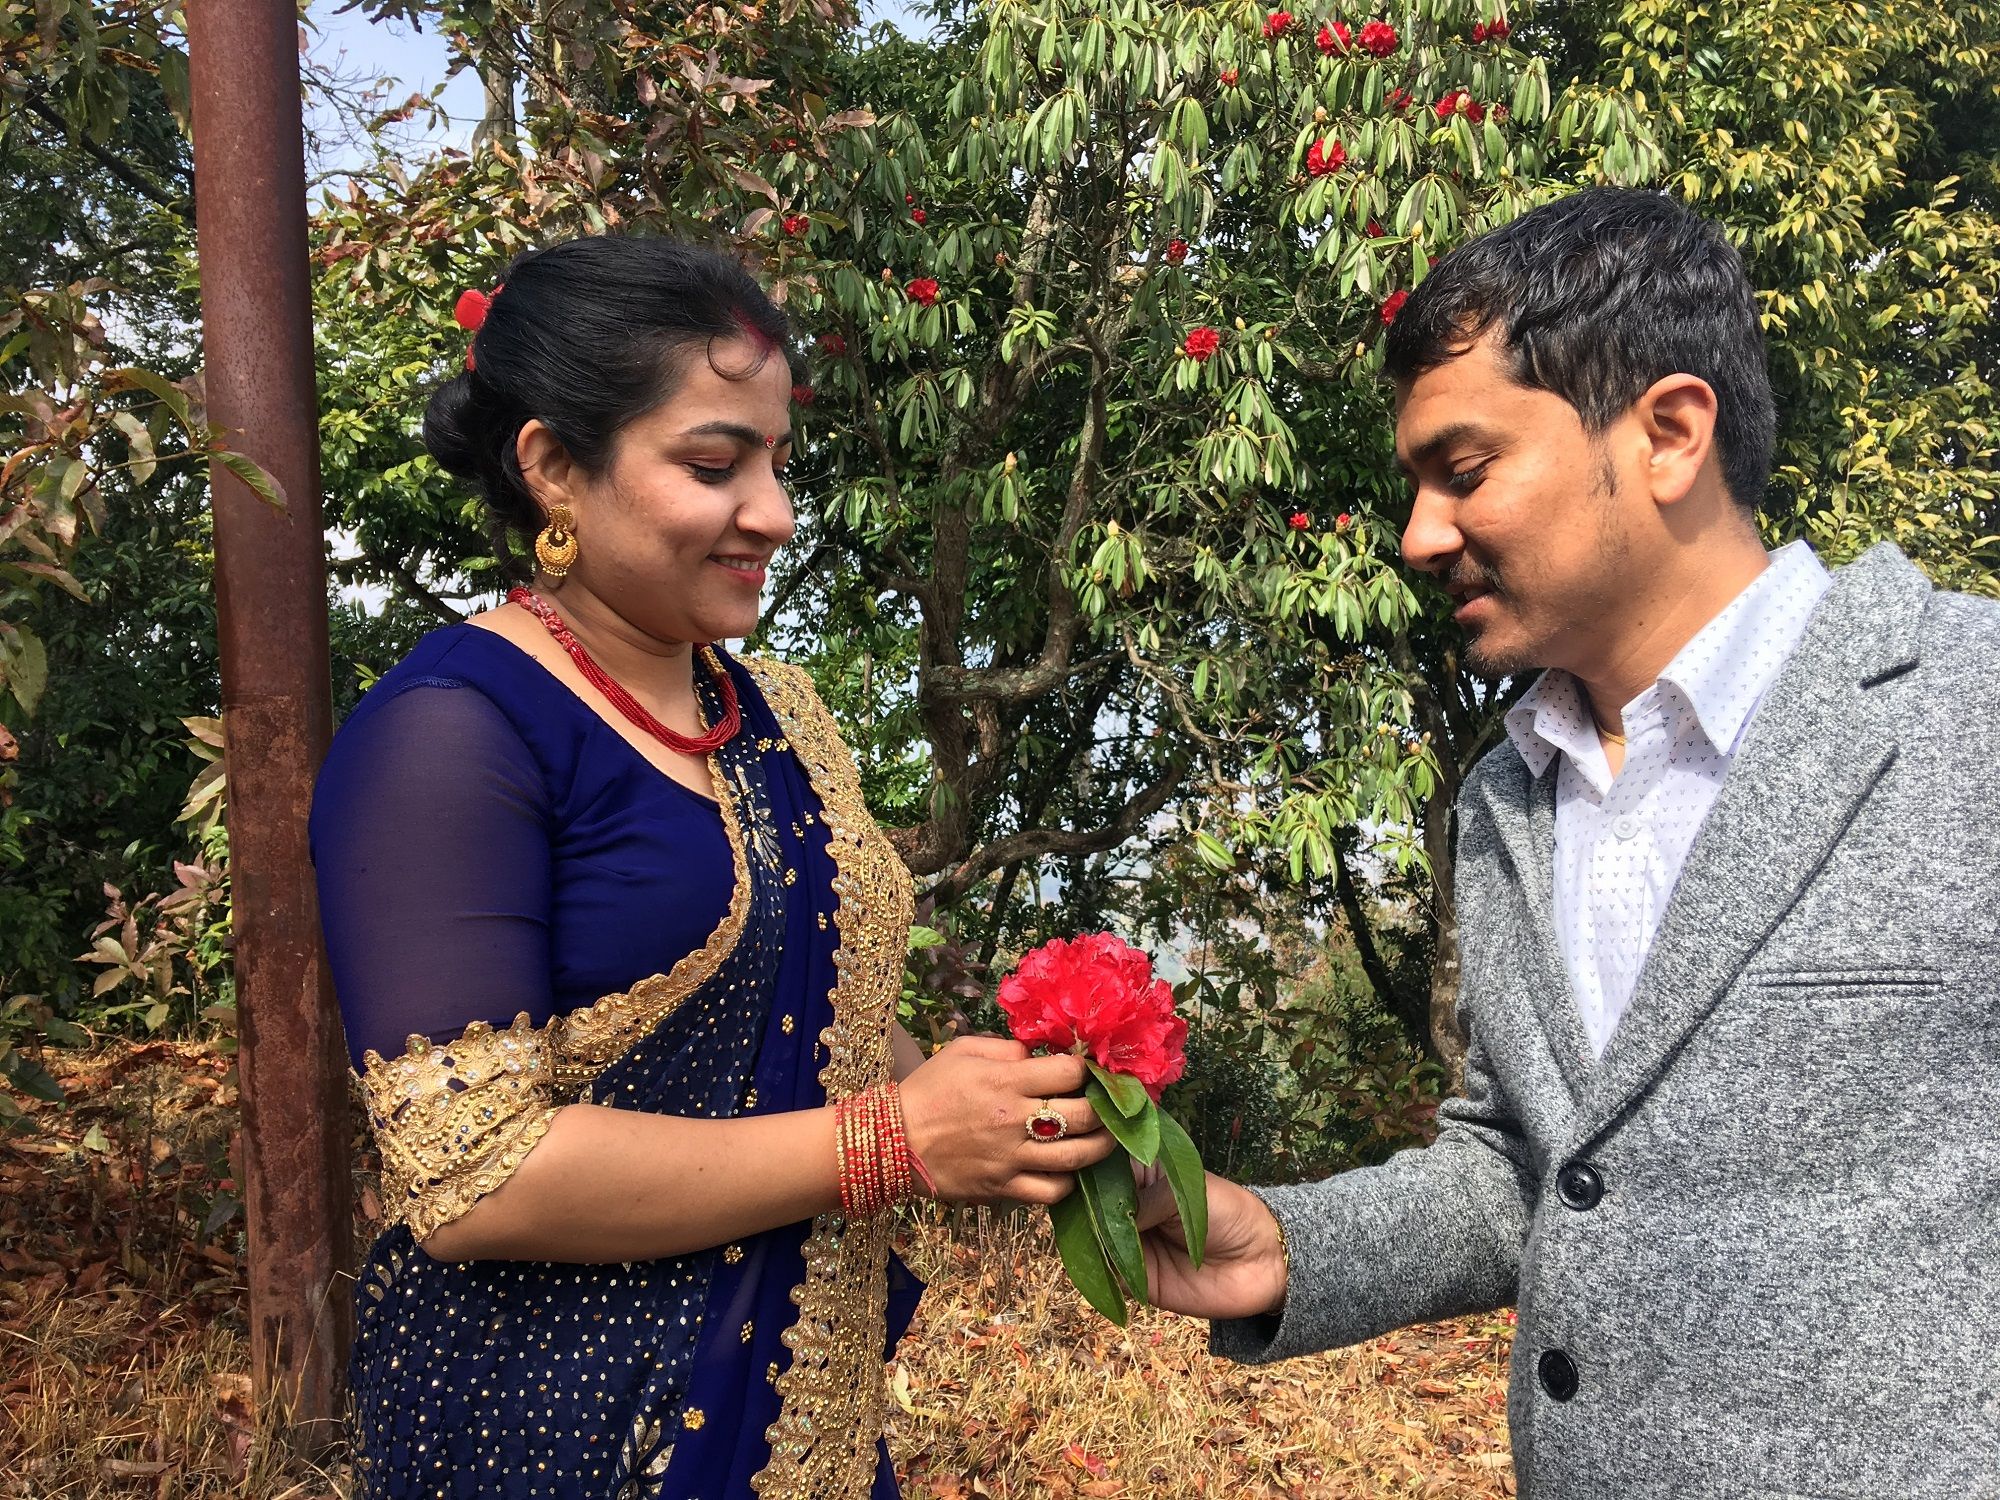 Giving national flower to her